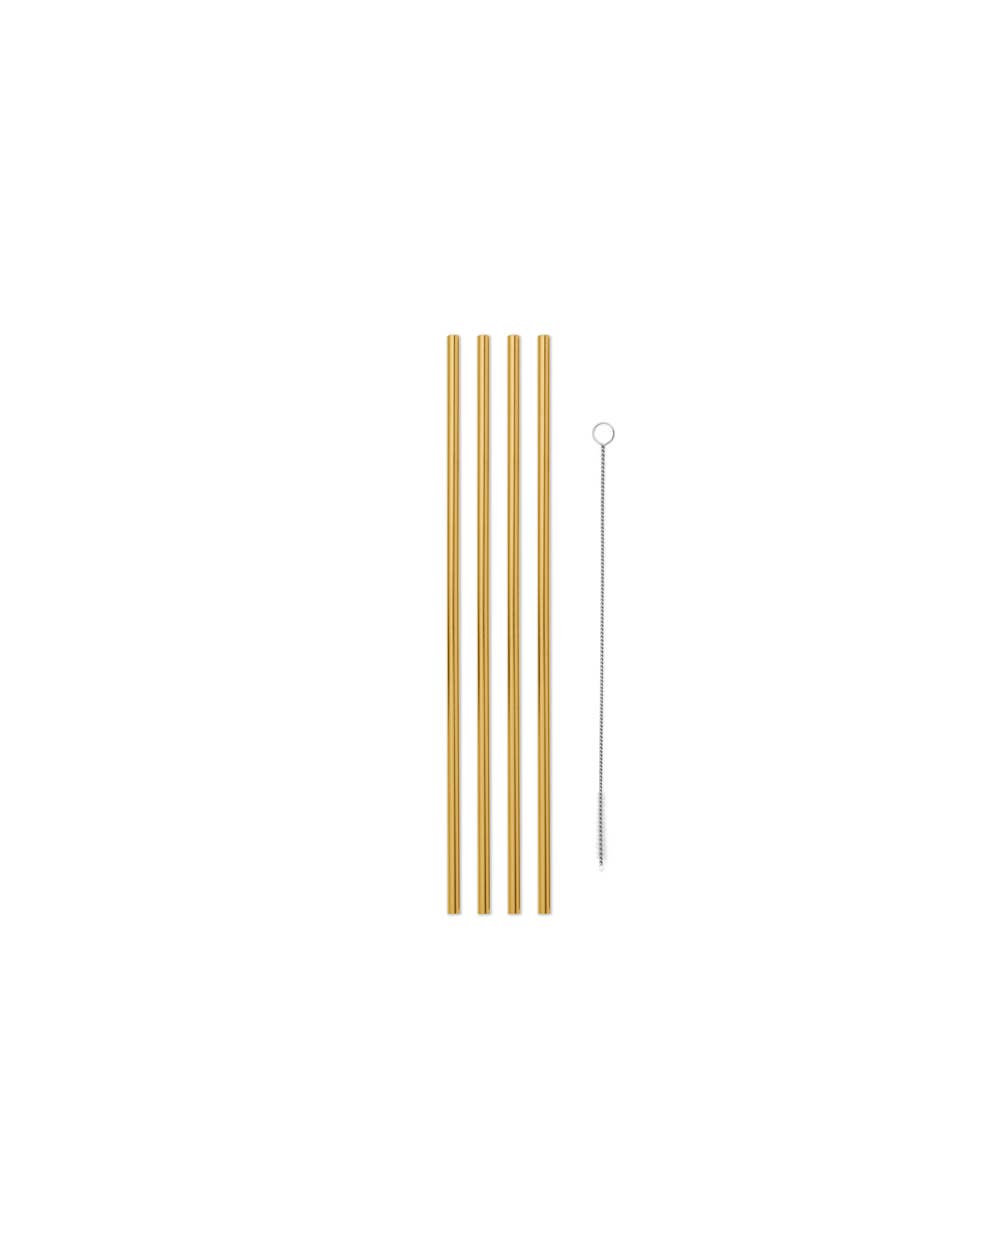 Porter 10in Metal Straws, Set of 4 with Cleaner: Gold